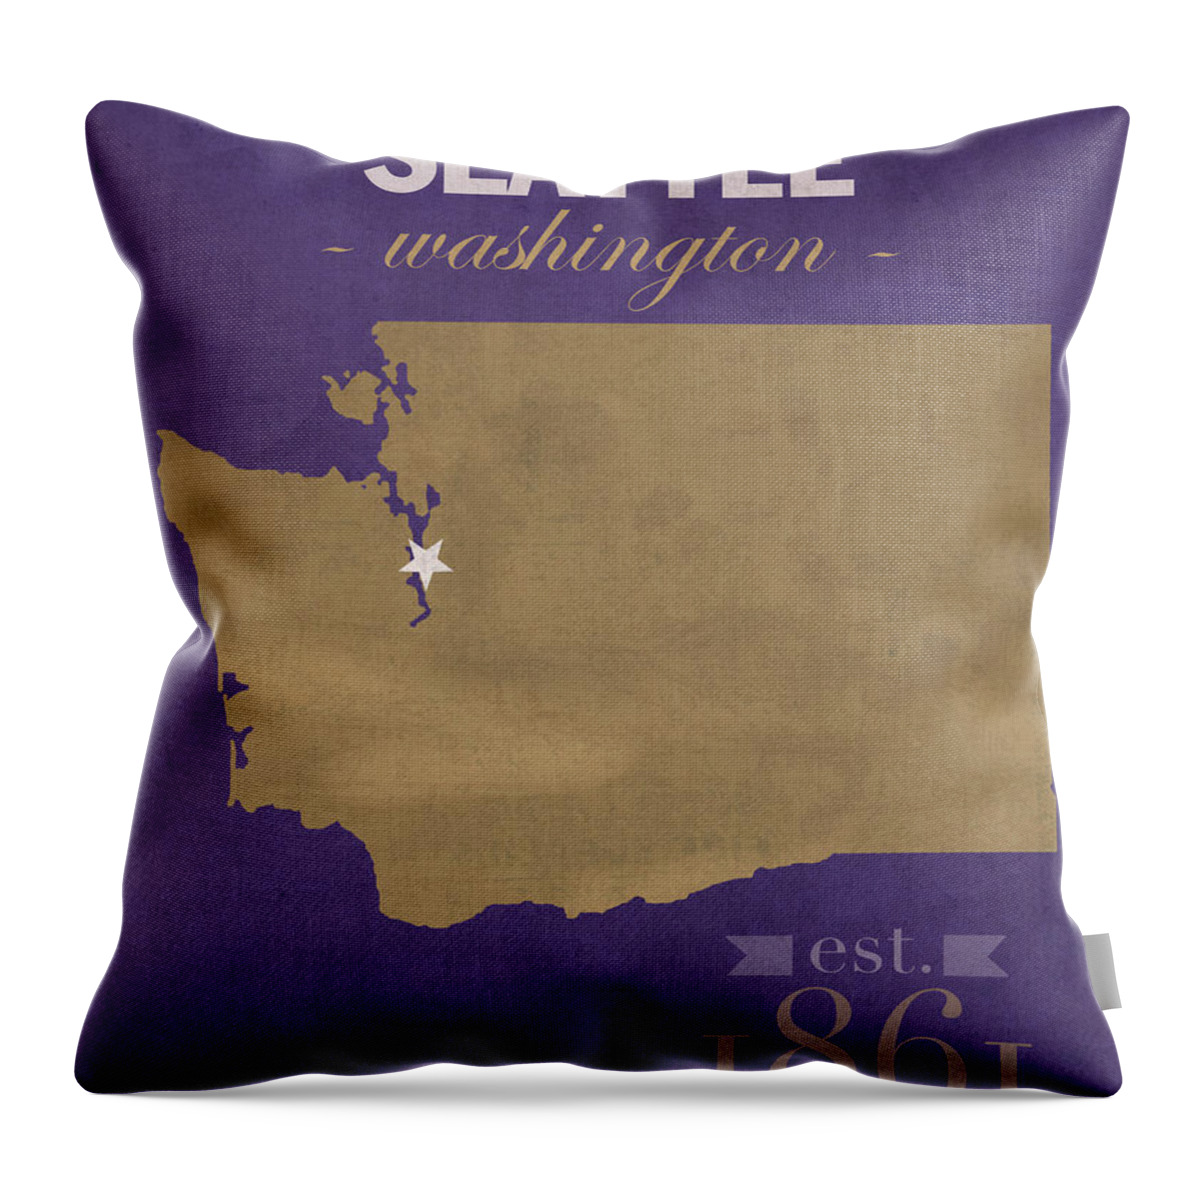 University Of Washington Throw Pillow featuring the mixed media University of Washington Huskies Seattle College Town State Map Poster Series No 122 by Design Turnpike